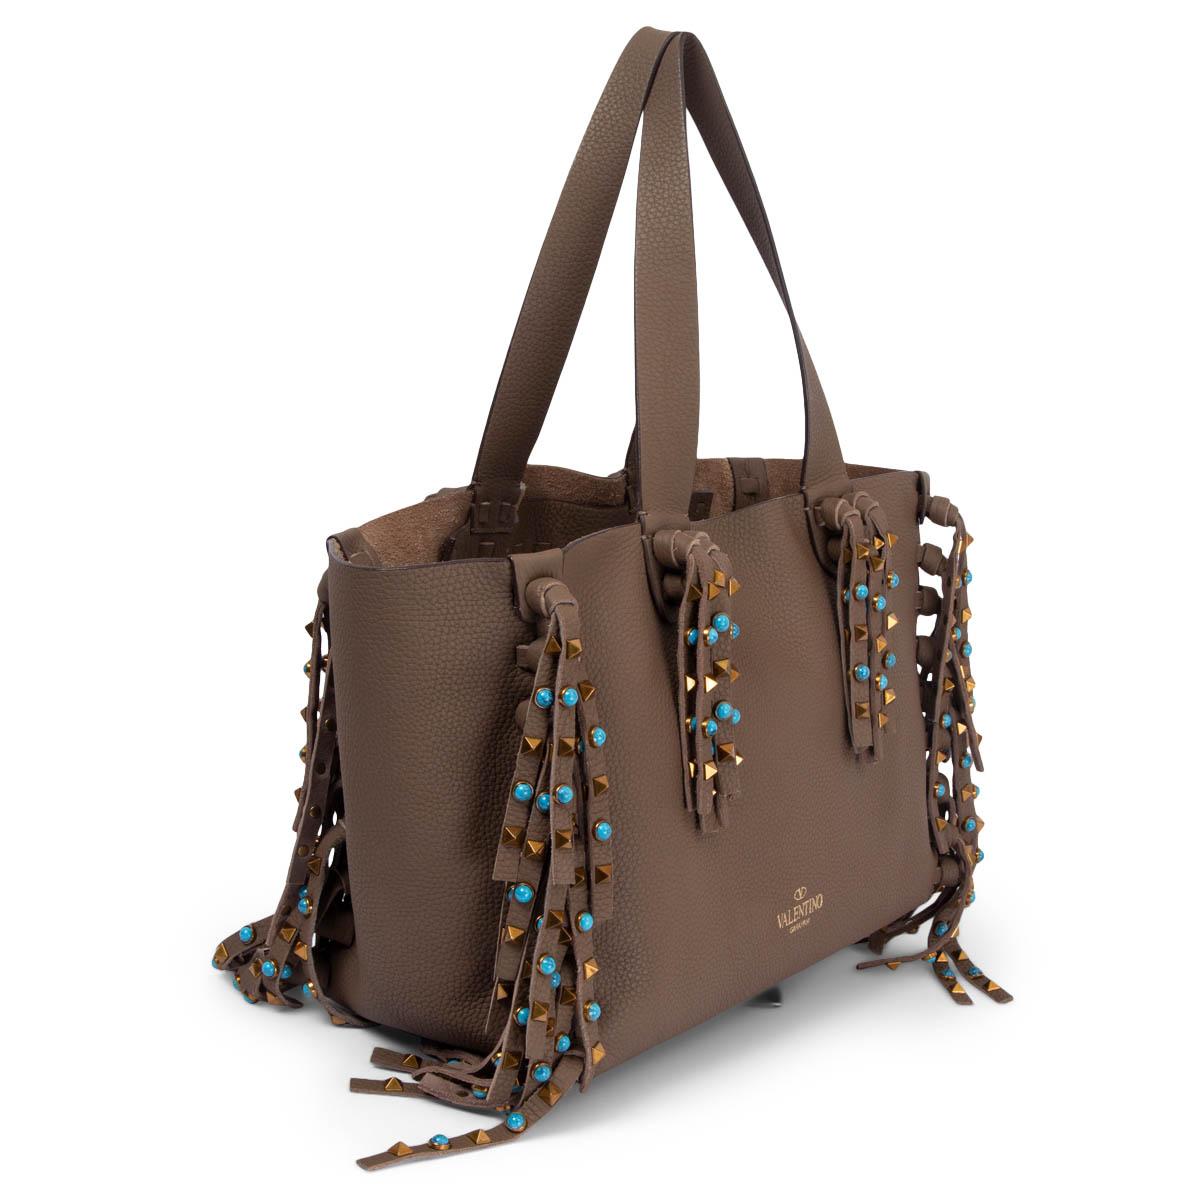 100% authentic Valentino C-Rockee fringe tote in grained olive drab calfskin embellished with signature pyramid studs in copper metal and turquoise cabochon stones. Lined in olive drab suede with two big zipper pockets. Has been carried and is in